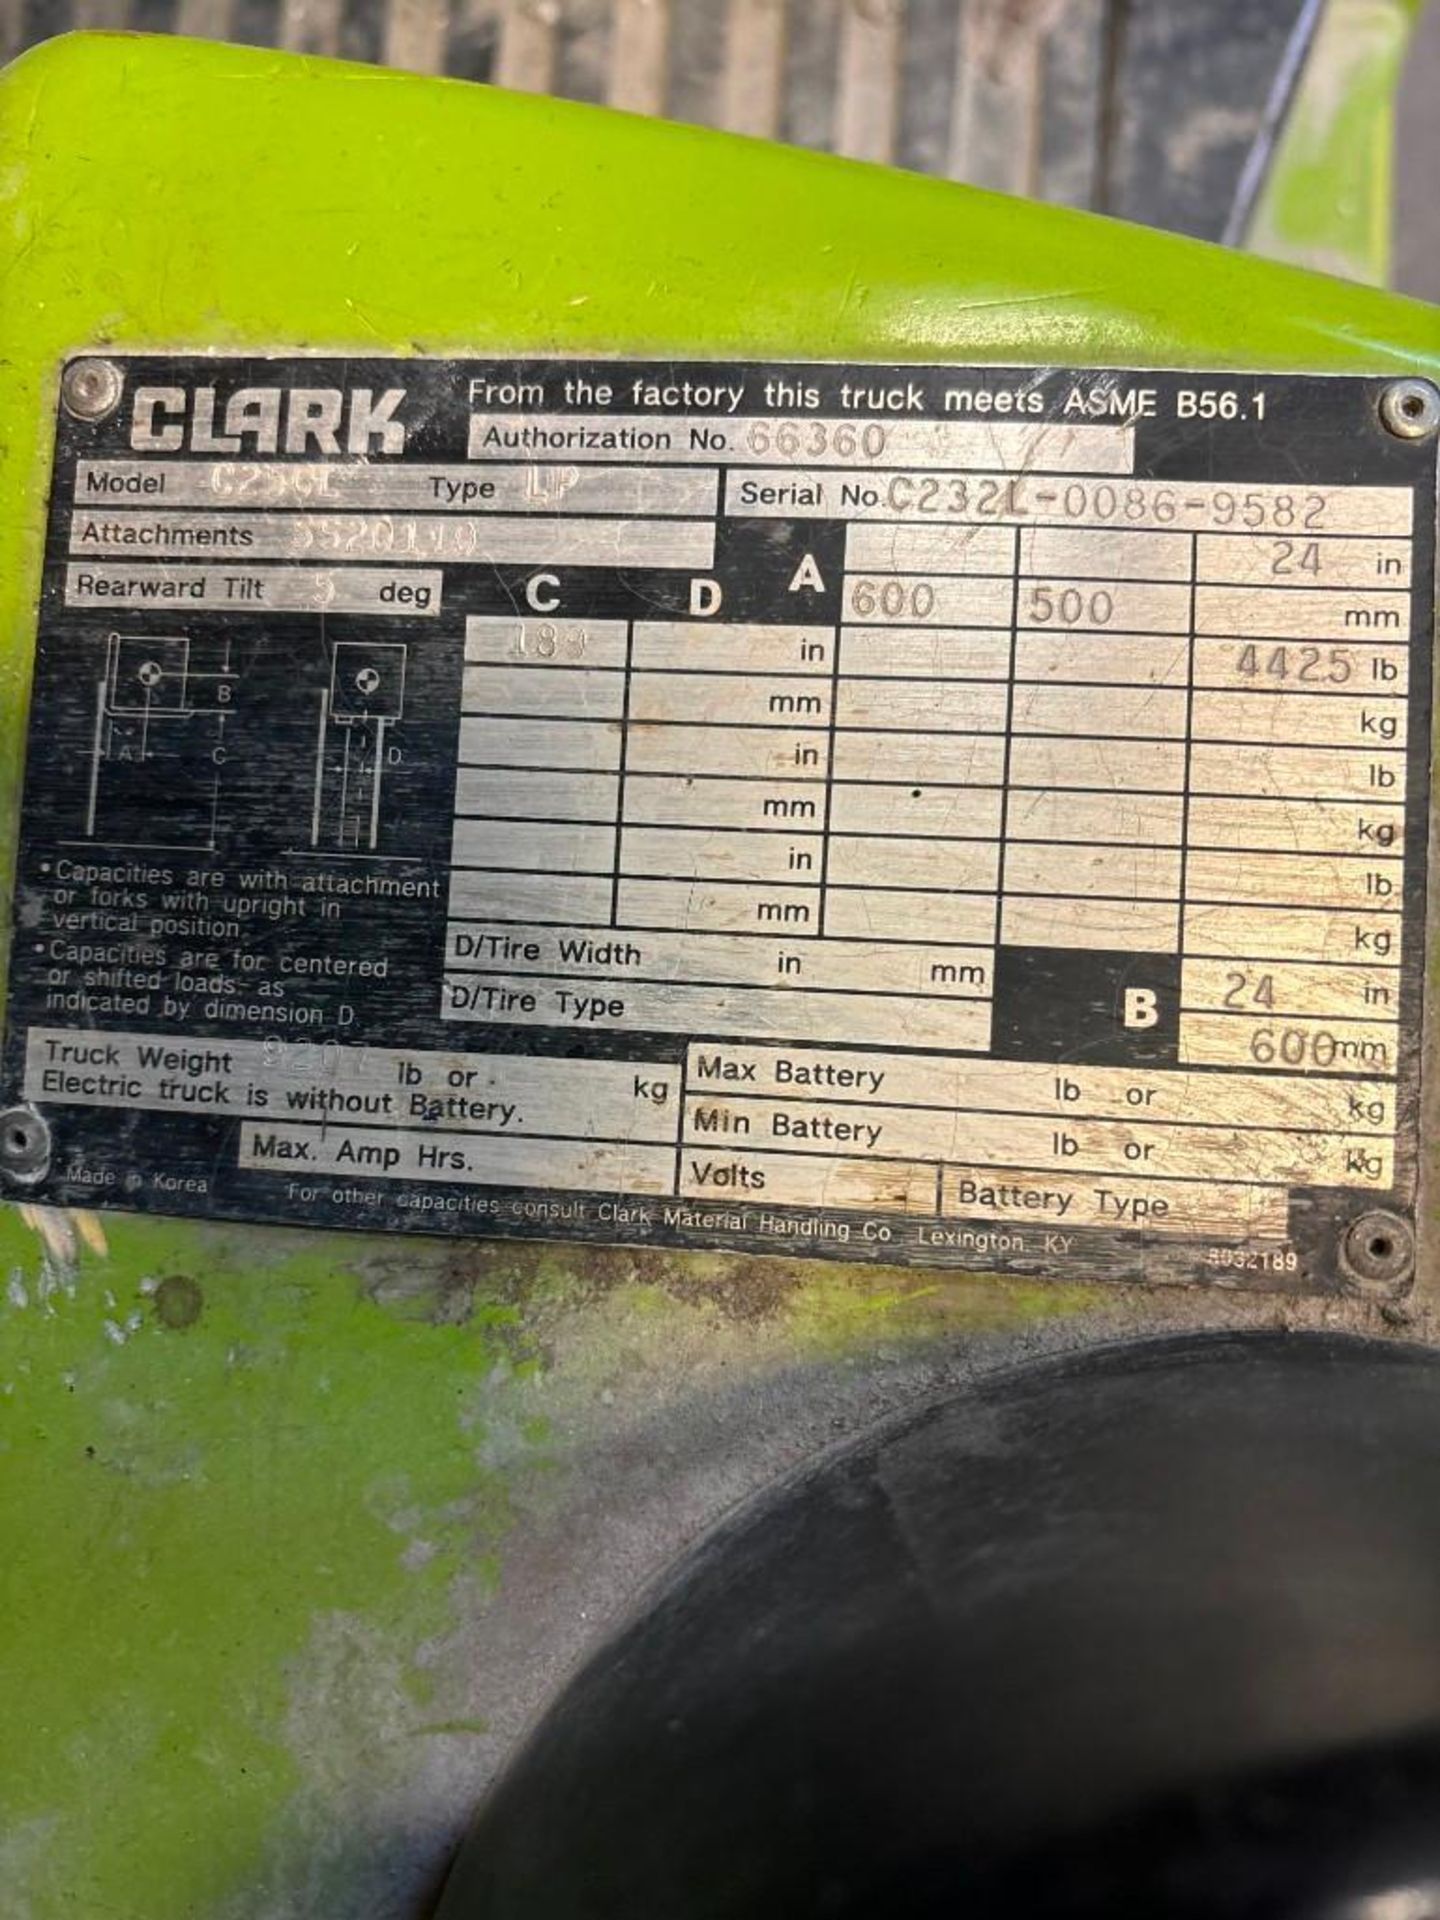 Clark C25CL 4400lbs. LPG Forklift, Side Shift, s/n C232L-0086-9582 *Late Delivery* - Image 3 of 4